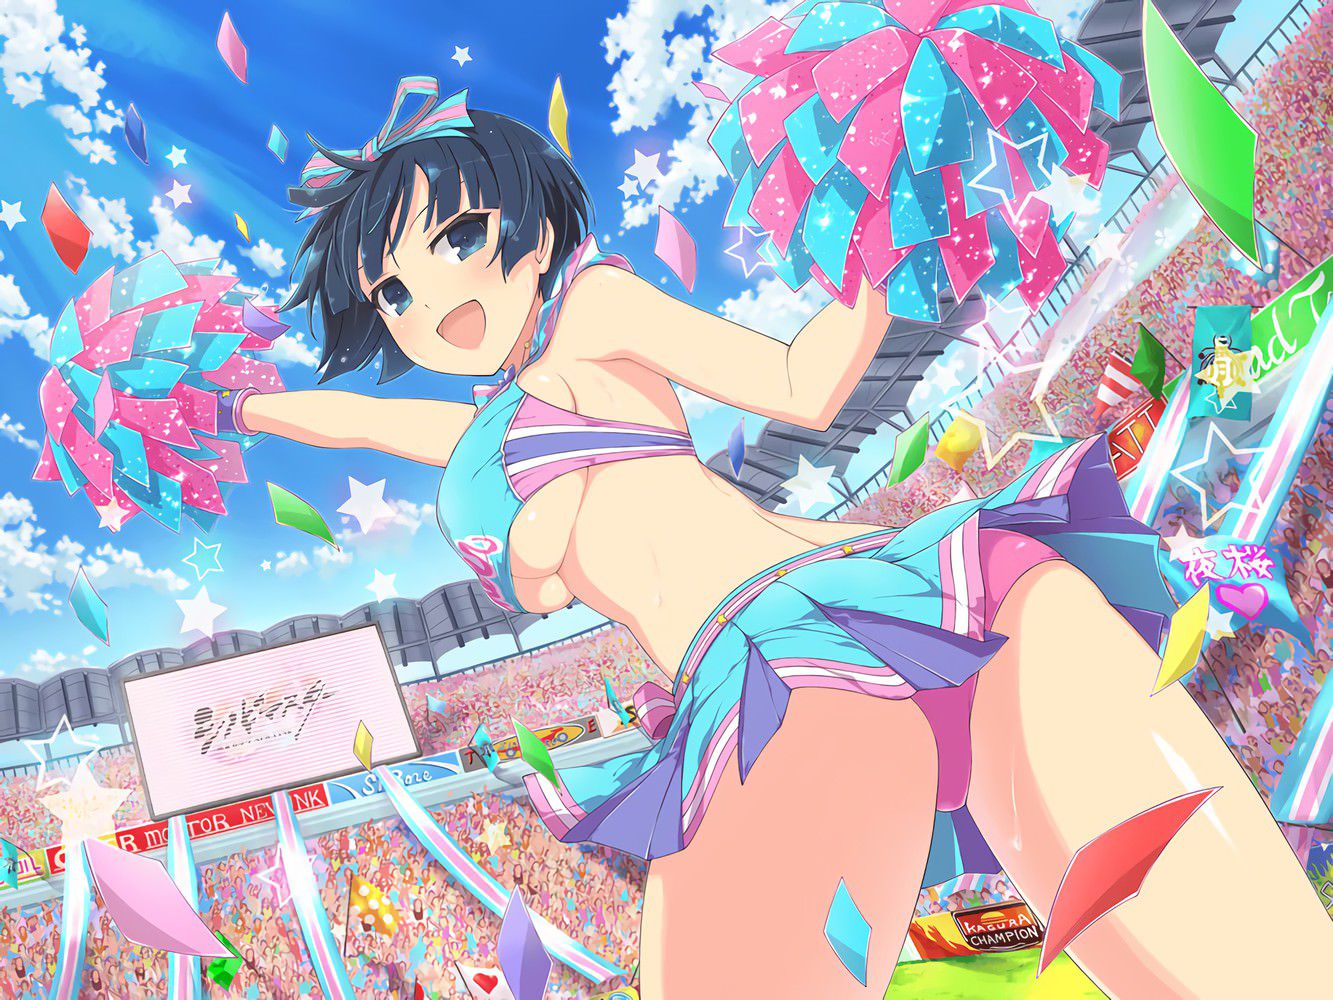 [Large amount of images] Cicolity is the most high erotic body girl wwwwwwwwwwww in Senran Kagura 82